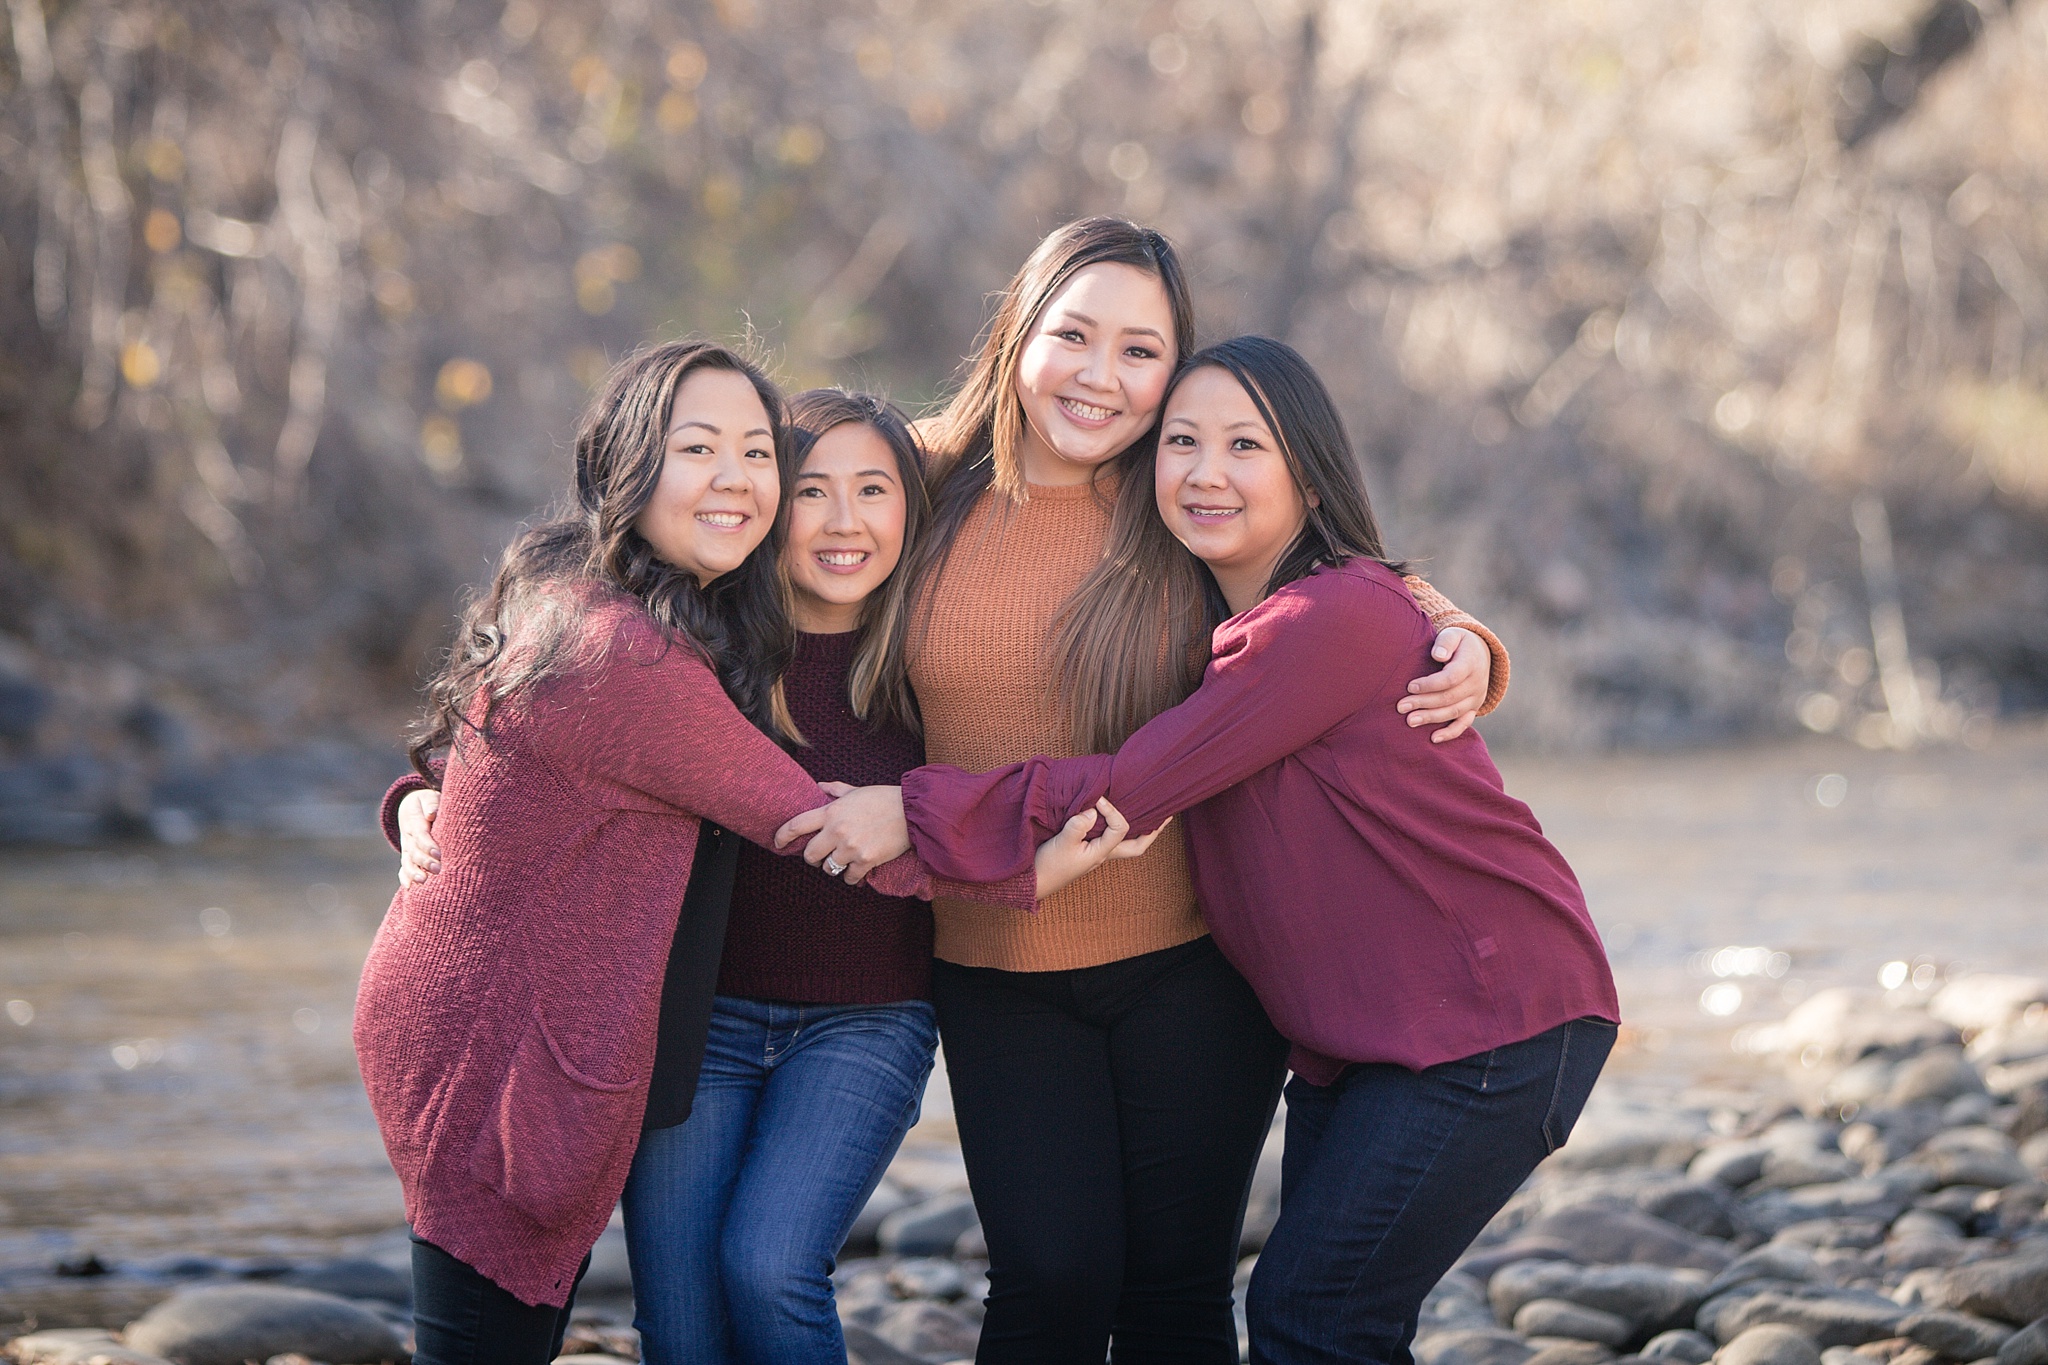 Sisters hugging during an extended family session. The Lee & Lor’s Family Photo Session at Clear Creek History Park by Colorado Family Photographer, Jennifer Garza. Colorado Family Photography, Colorado Family Photographer, Clear Creek History Park Family Photographer, Clear Creek History Park Family Photography, Clear Creek History Park, Golden History Park Family Photographer, Golden Family Photographer, Golden Family Photography, Golden History Park, Denver Family Photos